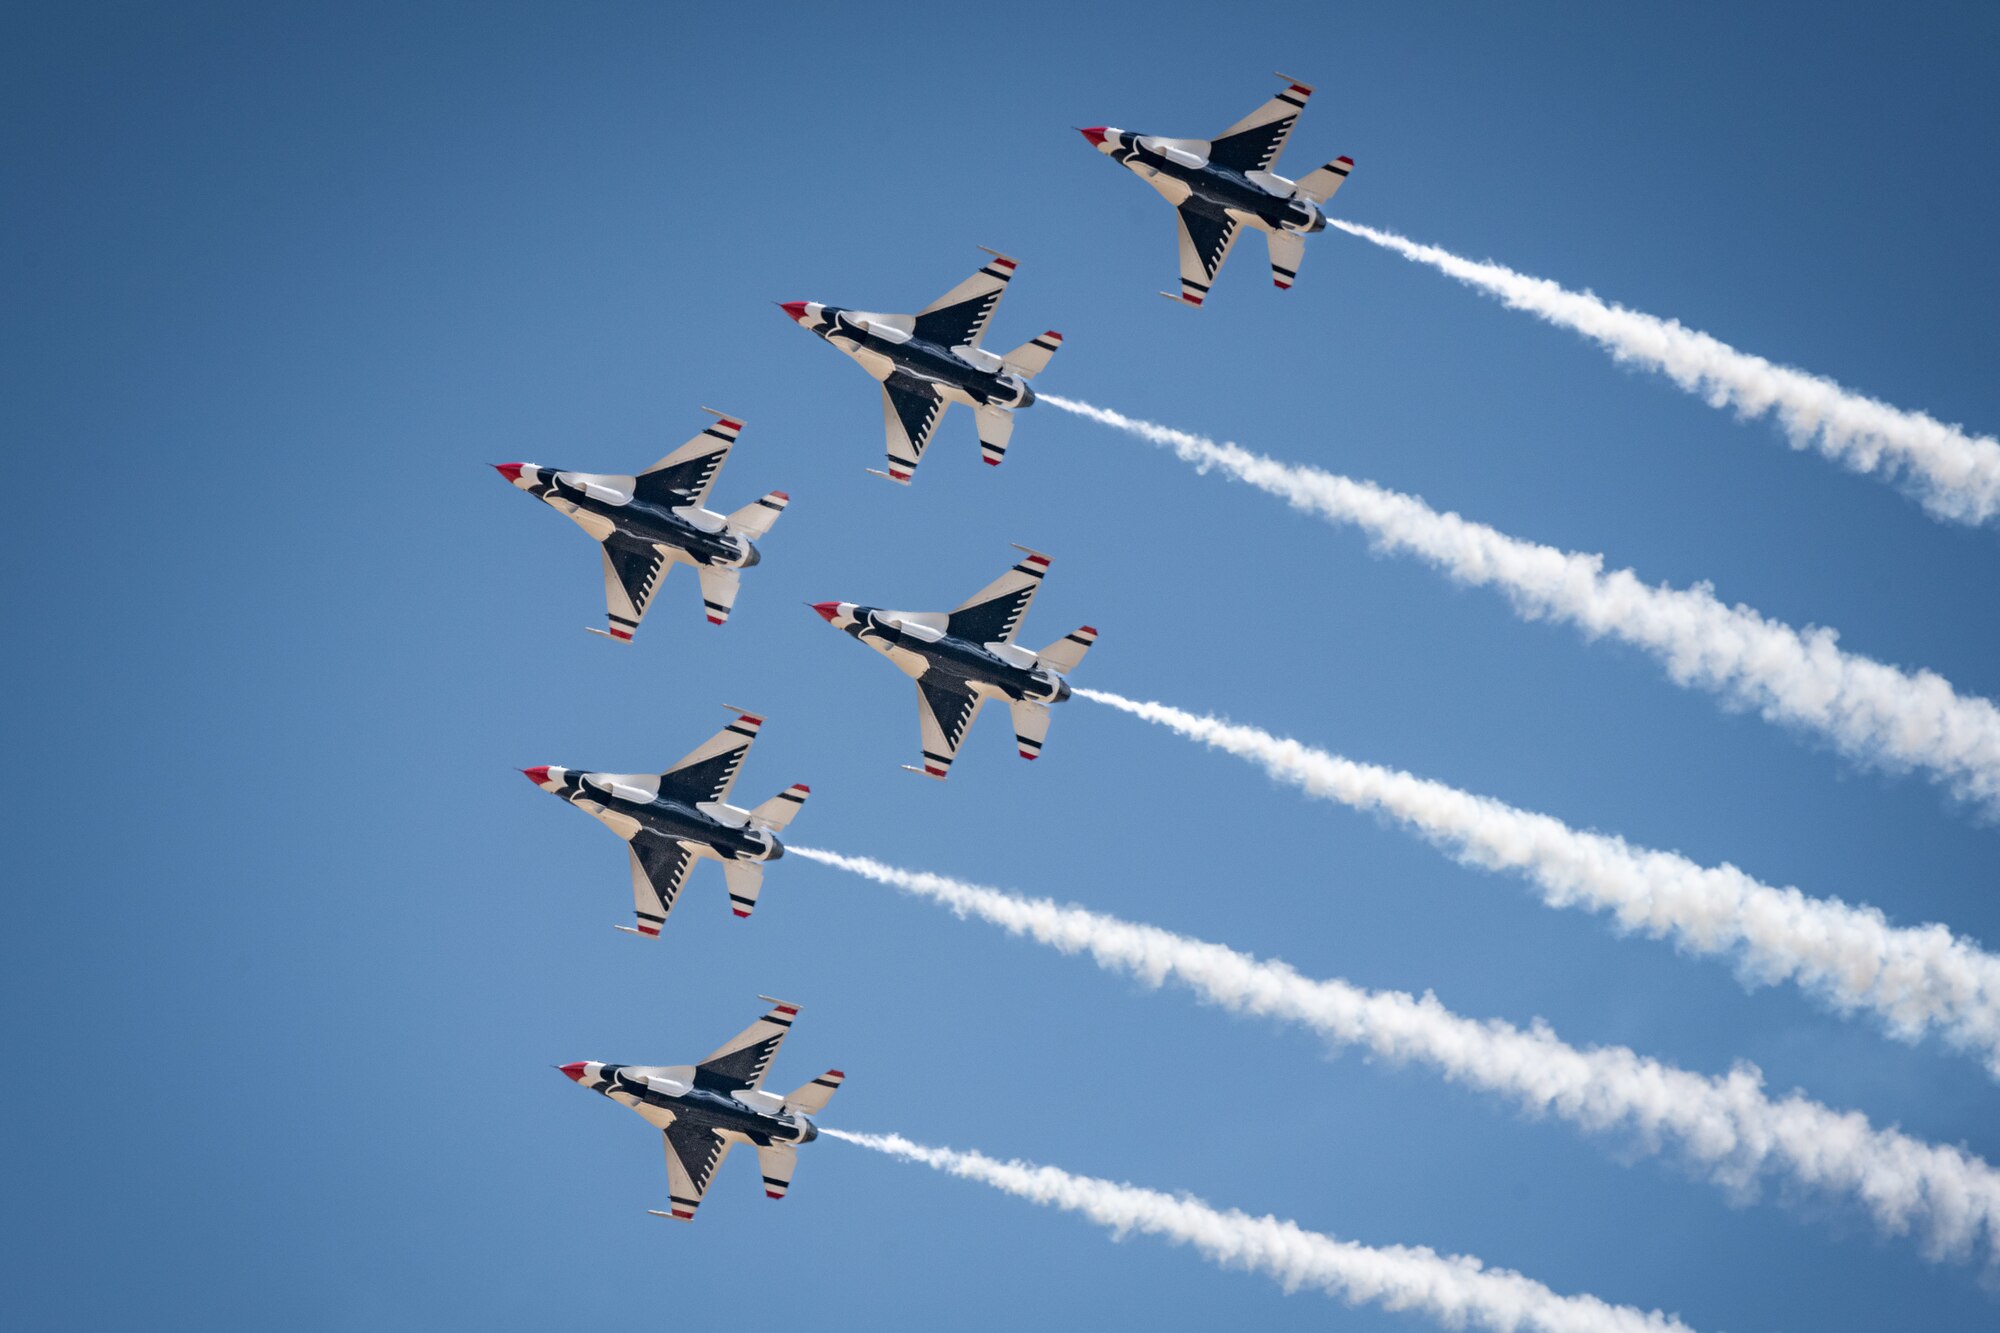 The U.S. Air Force Air Demonstration Squadron “Thunderbirds” perform an air show after the U.S. Air Force Academy Class of 2022 Graduation Ceremony at the Air Force Academy in Colorado Springs, Colo., May 25, 2022. Nine-hundred-seventy cadets crossed the stage to become the Air Force and Space Force’s newest second lieutenants. (U.S. Air Force photo by Joshua Armstrong)